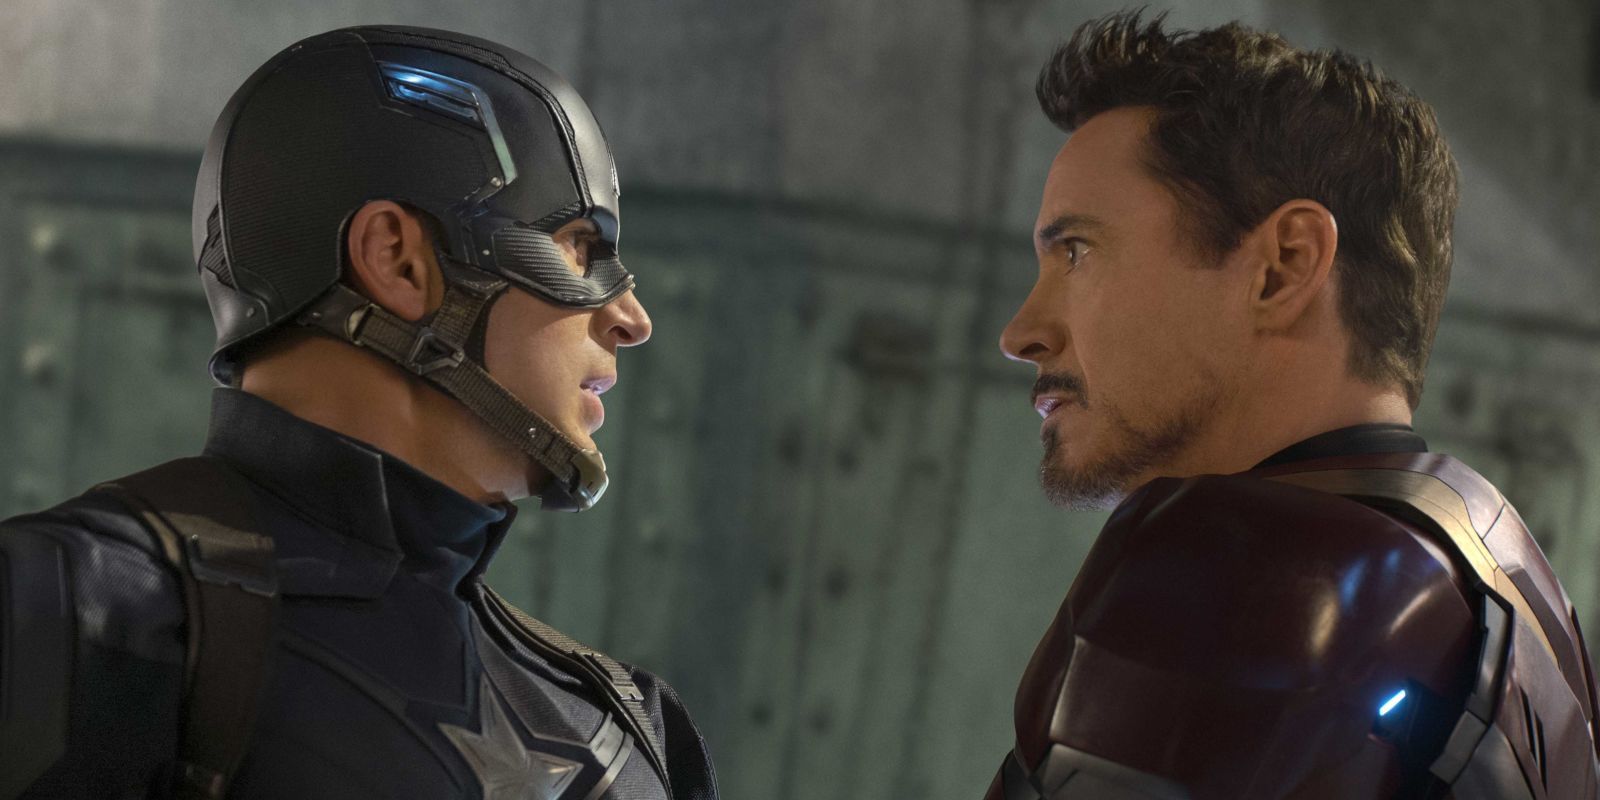 Angry Iron Man confronts Captain America